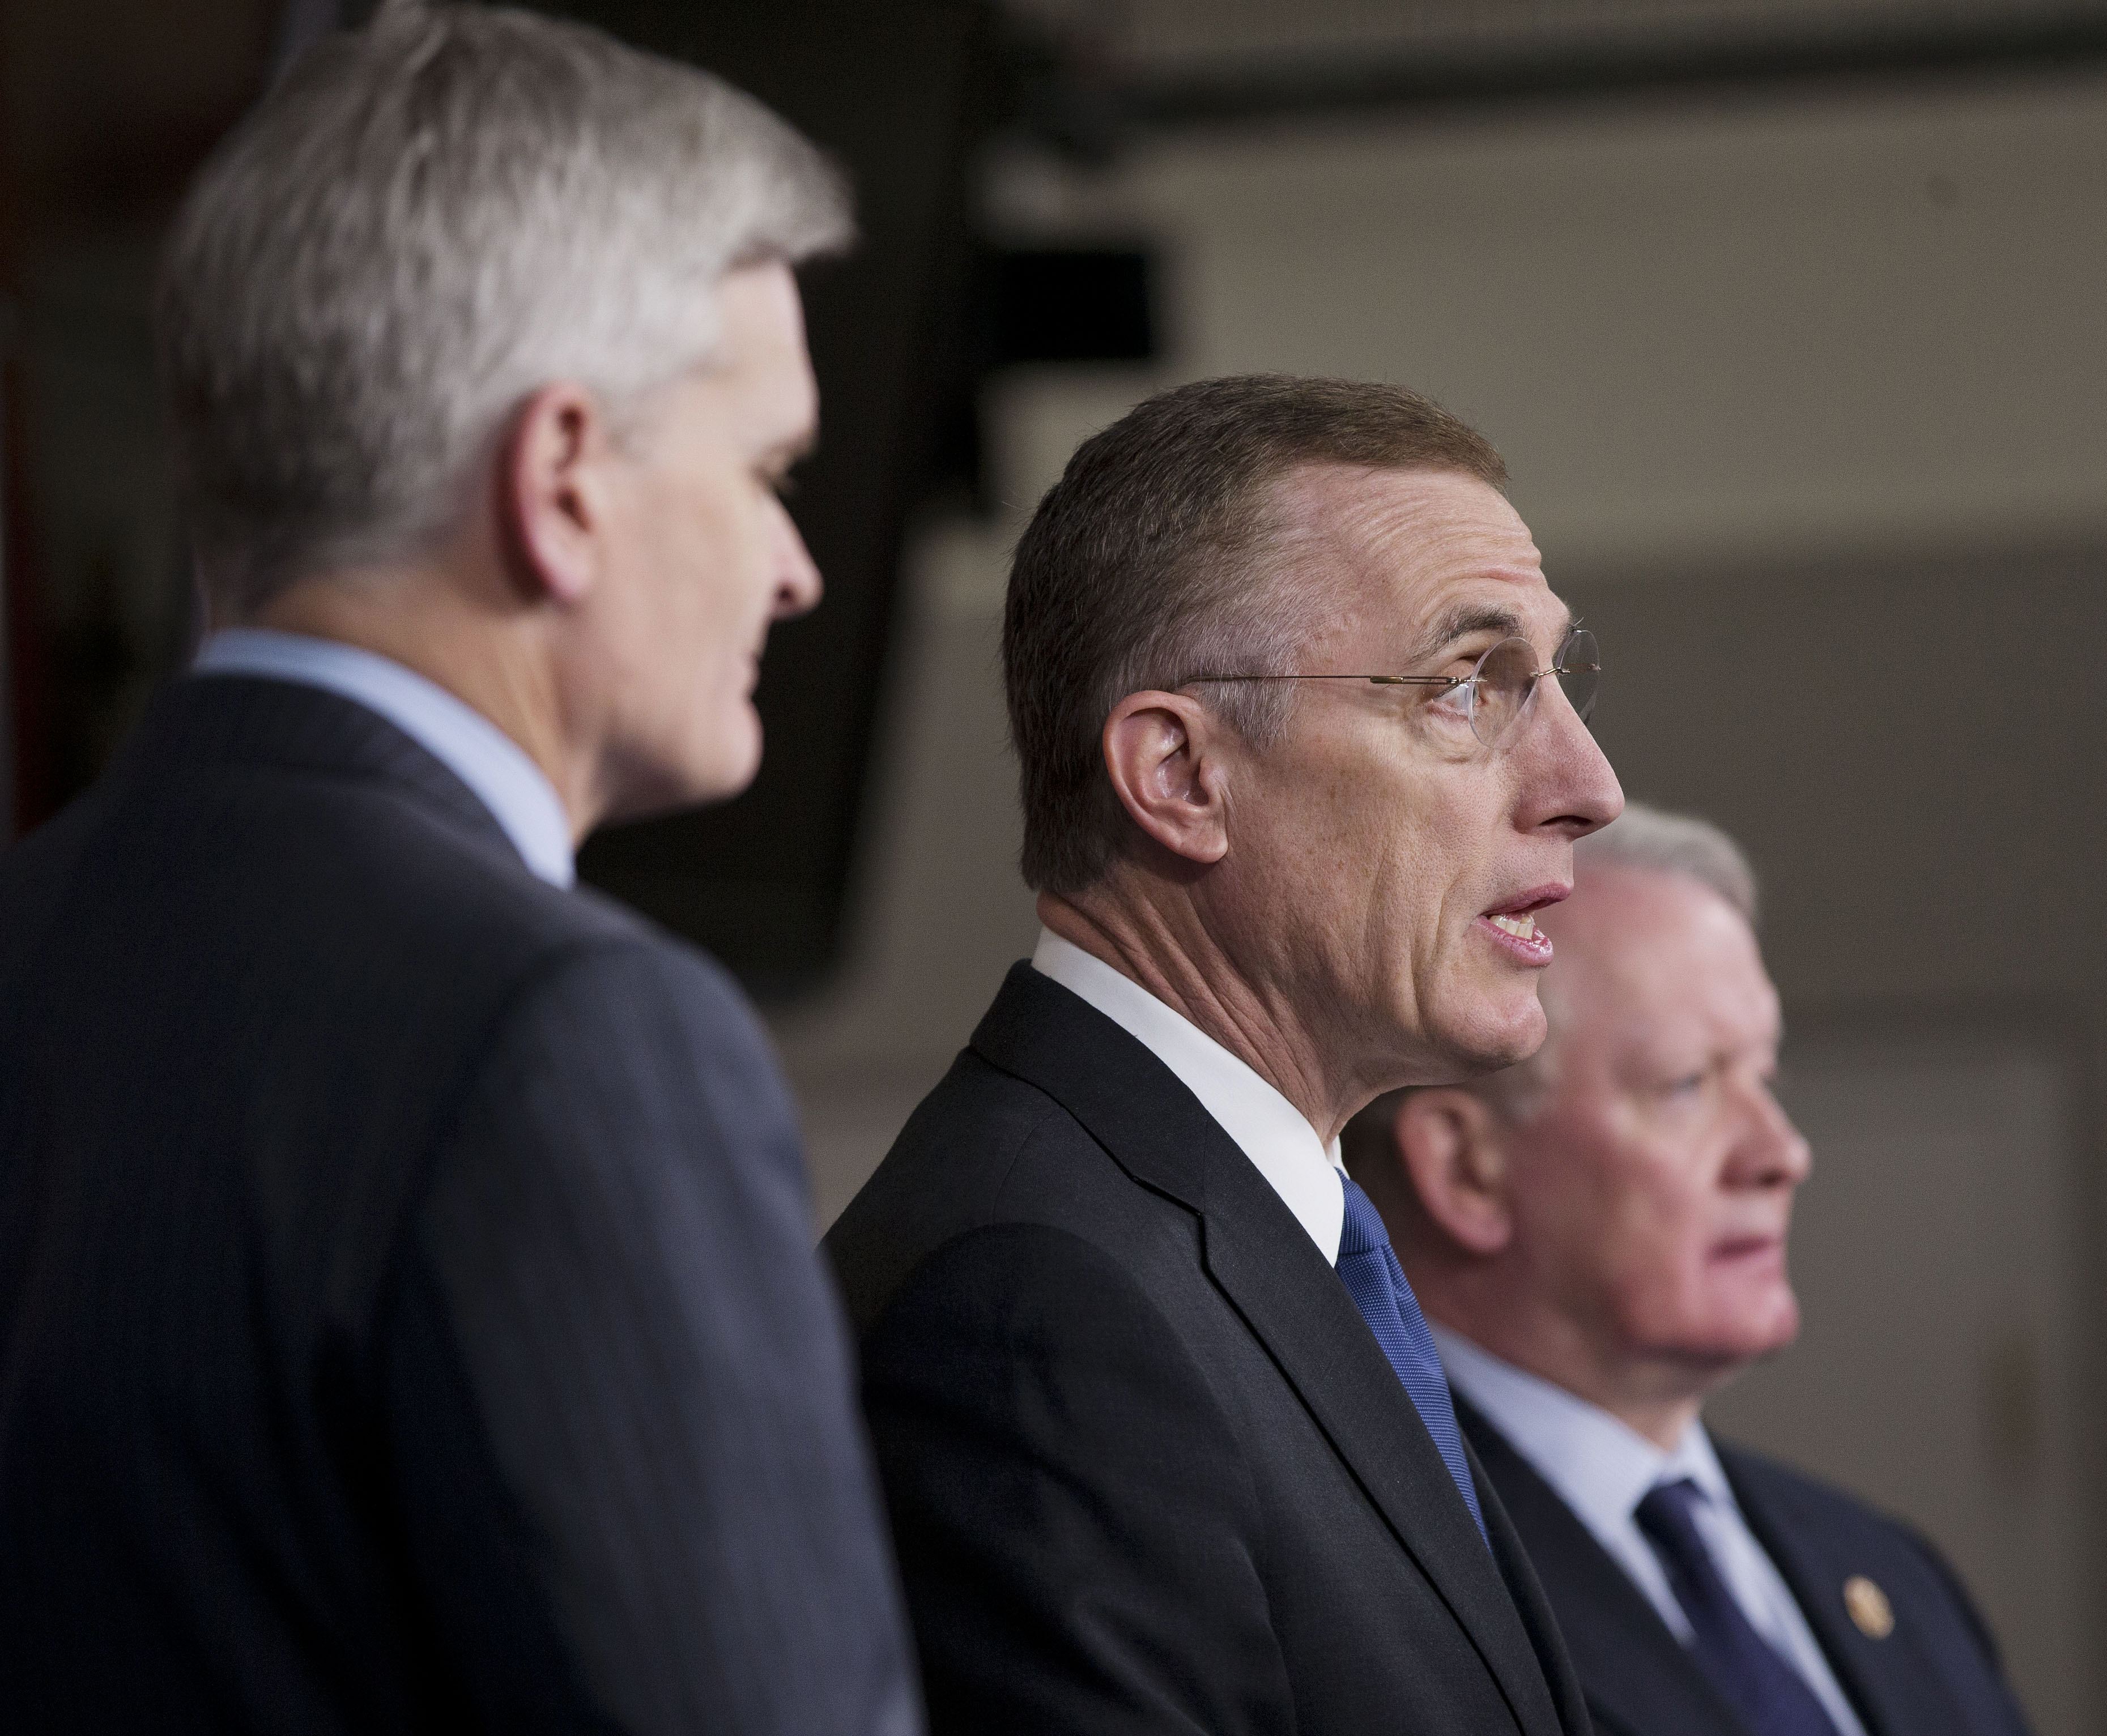 Rep. Tim Murphy, R-Pa., center, flanked by Rep. Leonard Lance, R-N.J.., right, and Rep. Bill Cassidy, R-La., speaks during a news conference on Capitol Hill to discuss a  legislative package of major mental health reforms on Dec. 12, 2013. The legislation passed the House Wednesday. (Pablo Martinez Monsivais&mdash;AP)